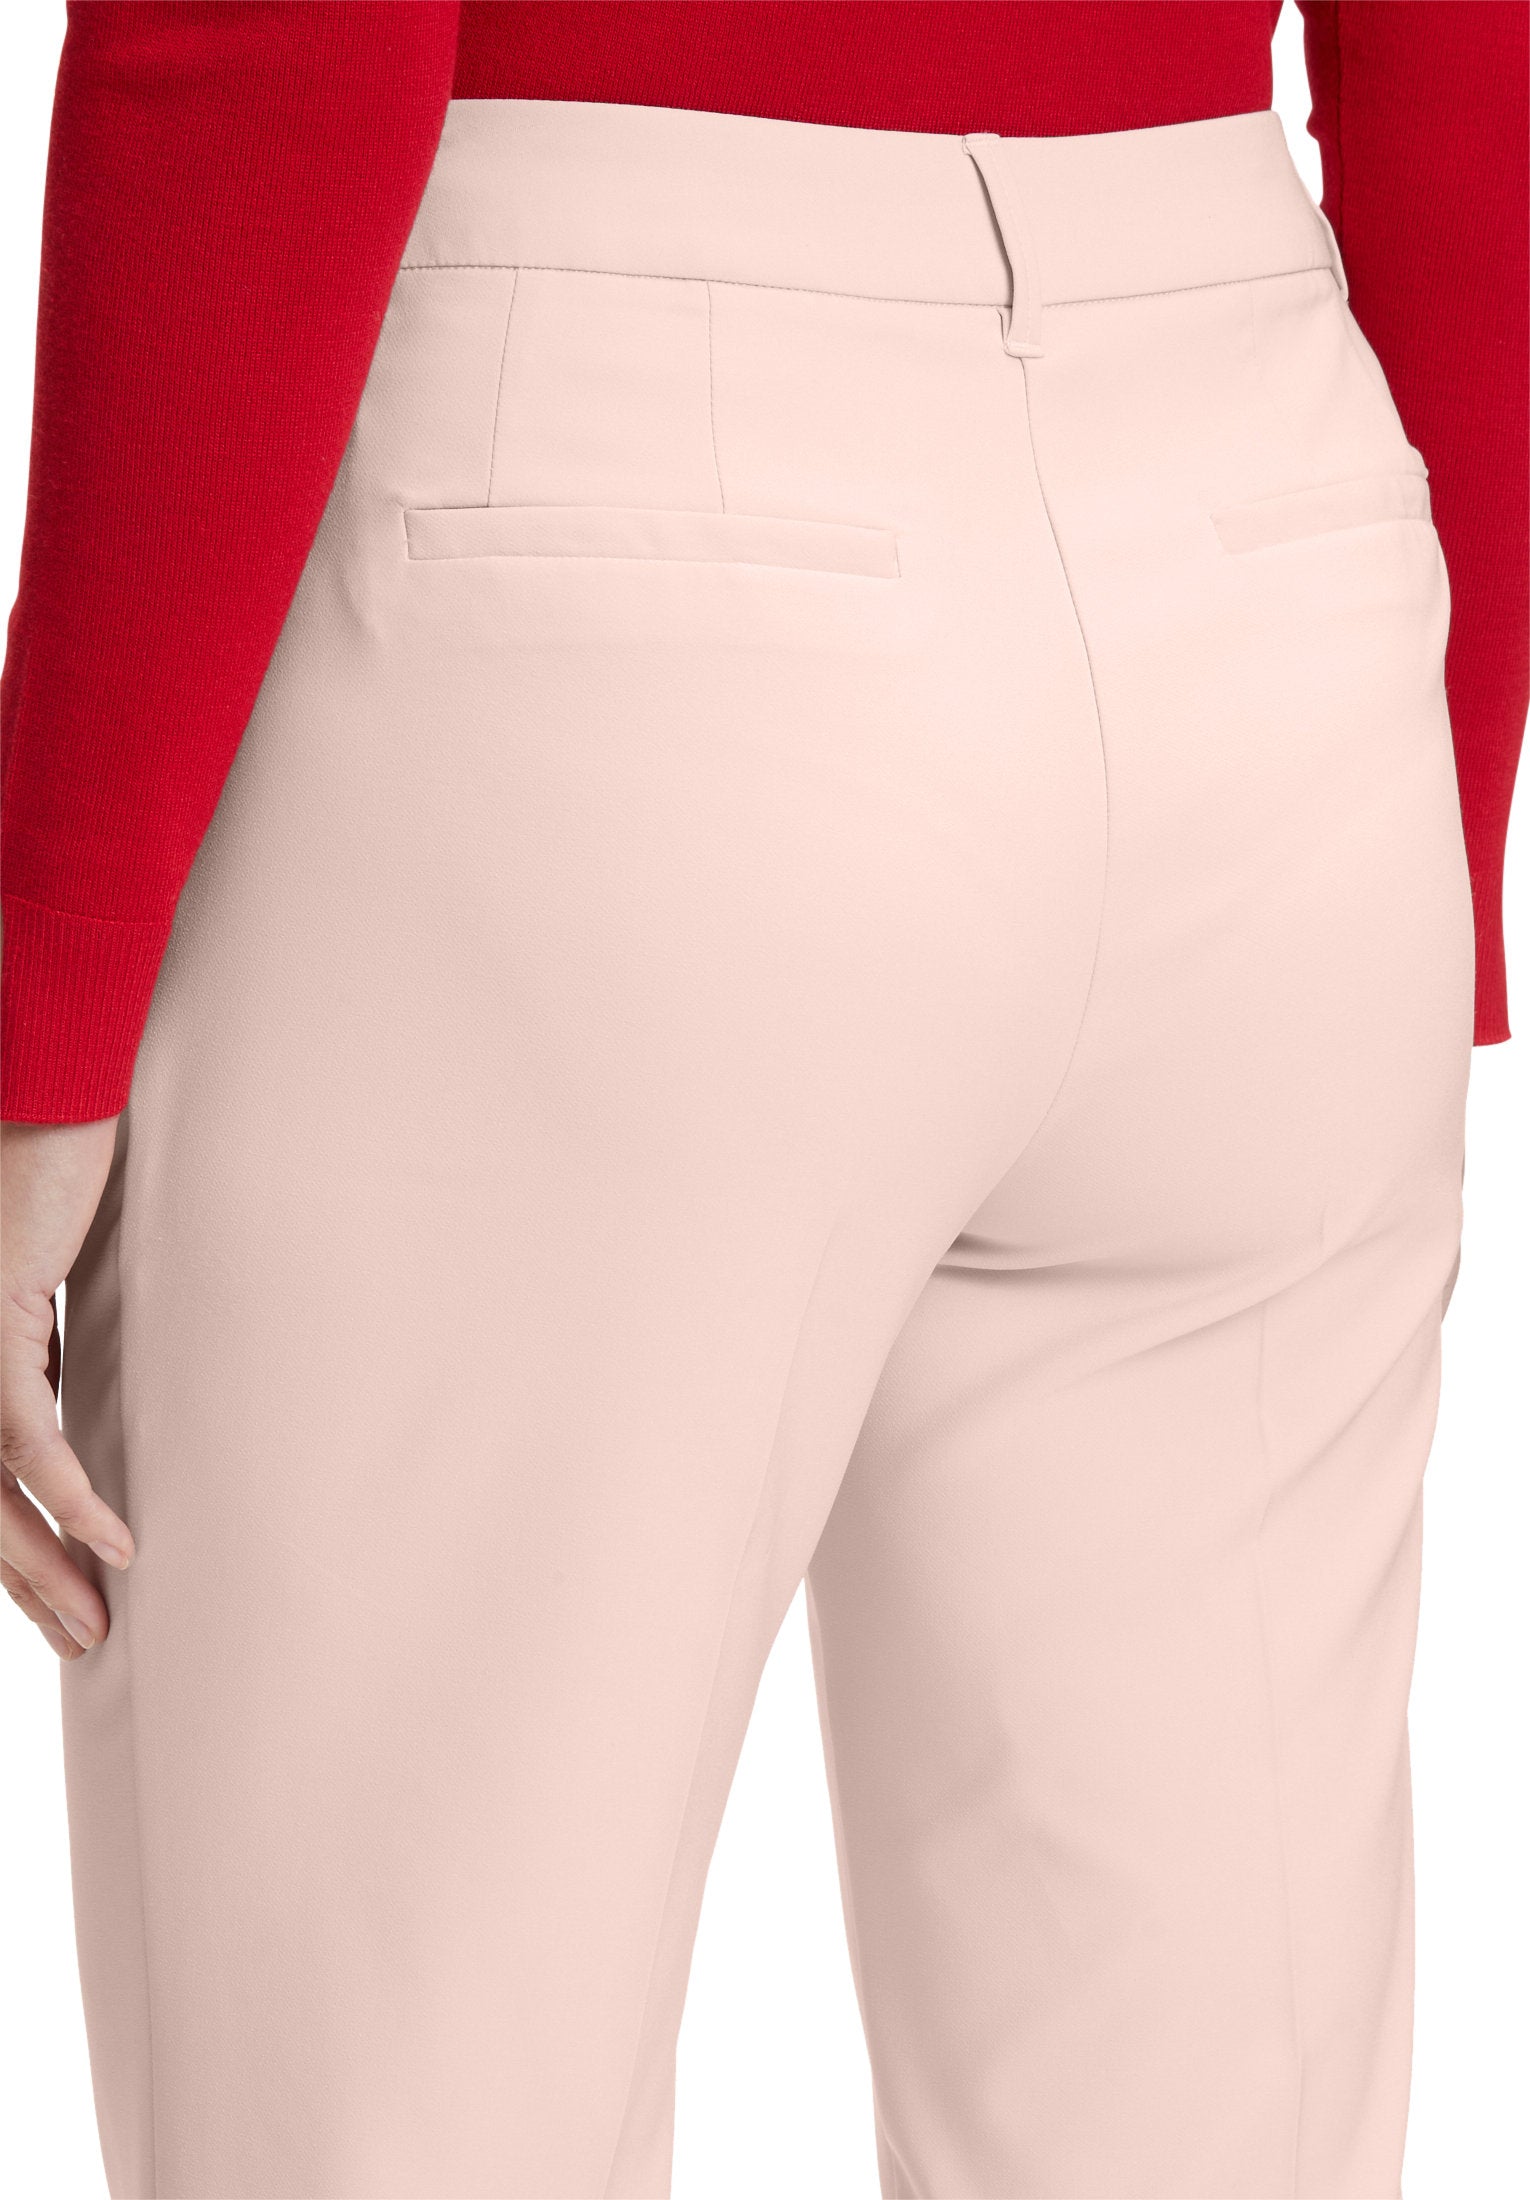 Business Trousers
With Crease_6002-1080_6055_07